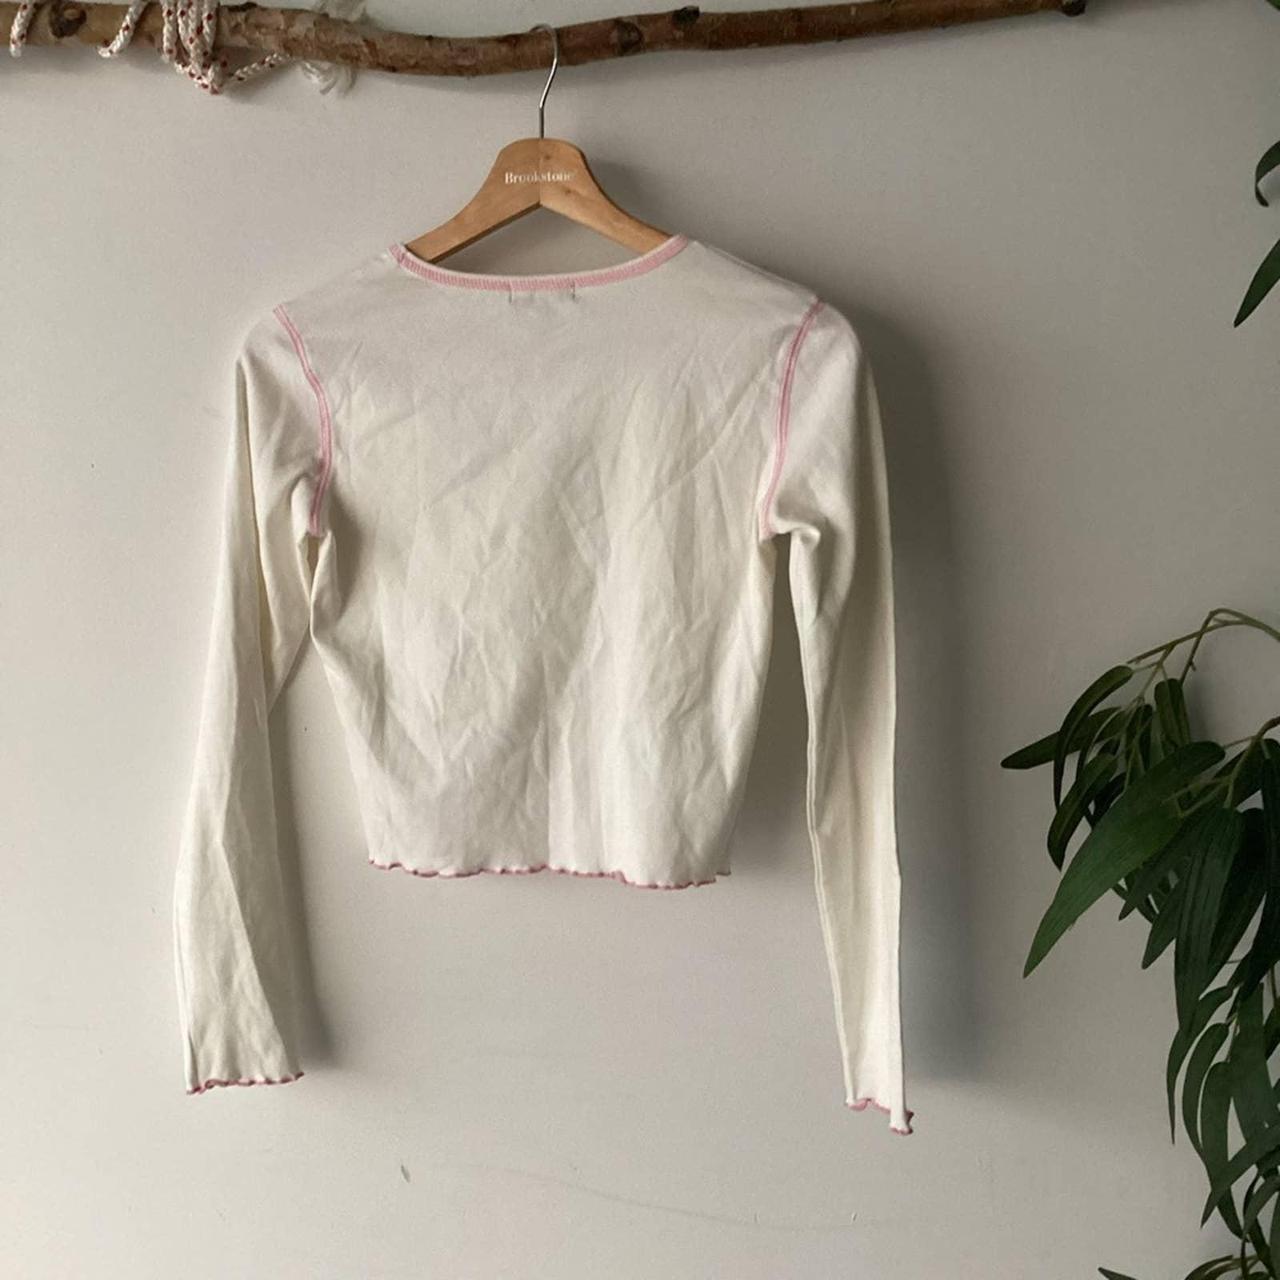 Delia's Women's White and Pink Shirt (2)